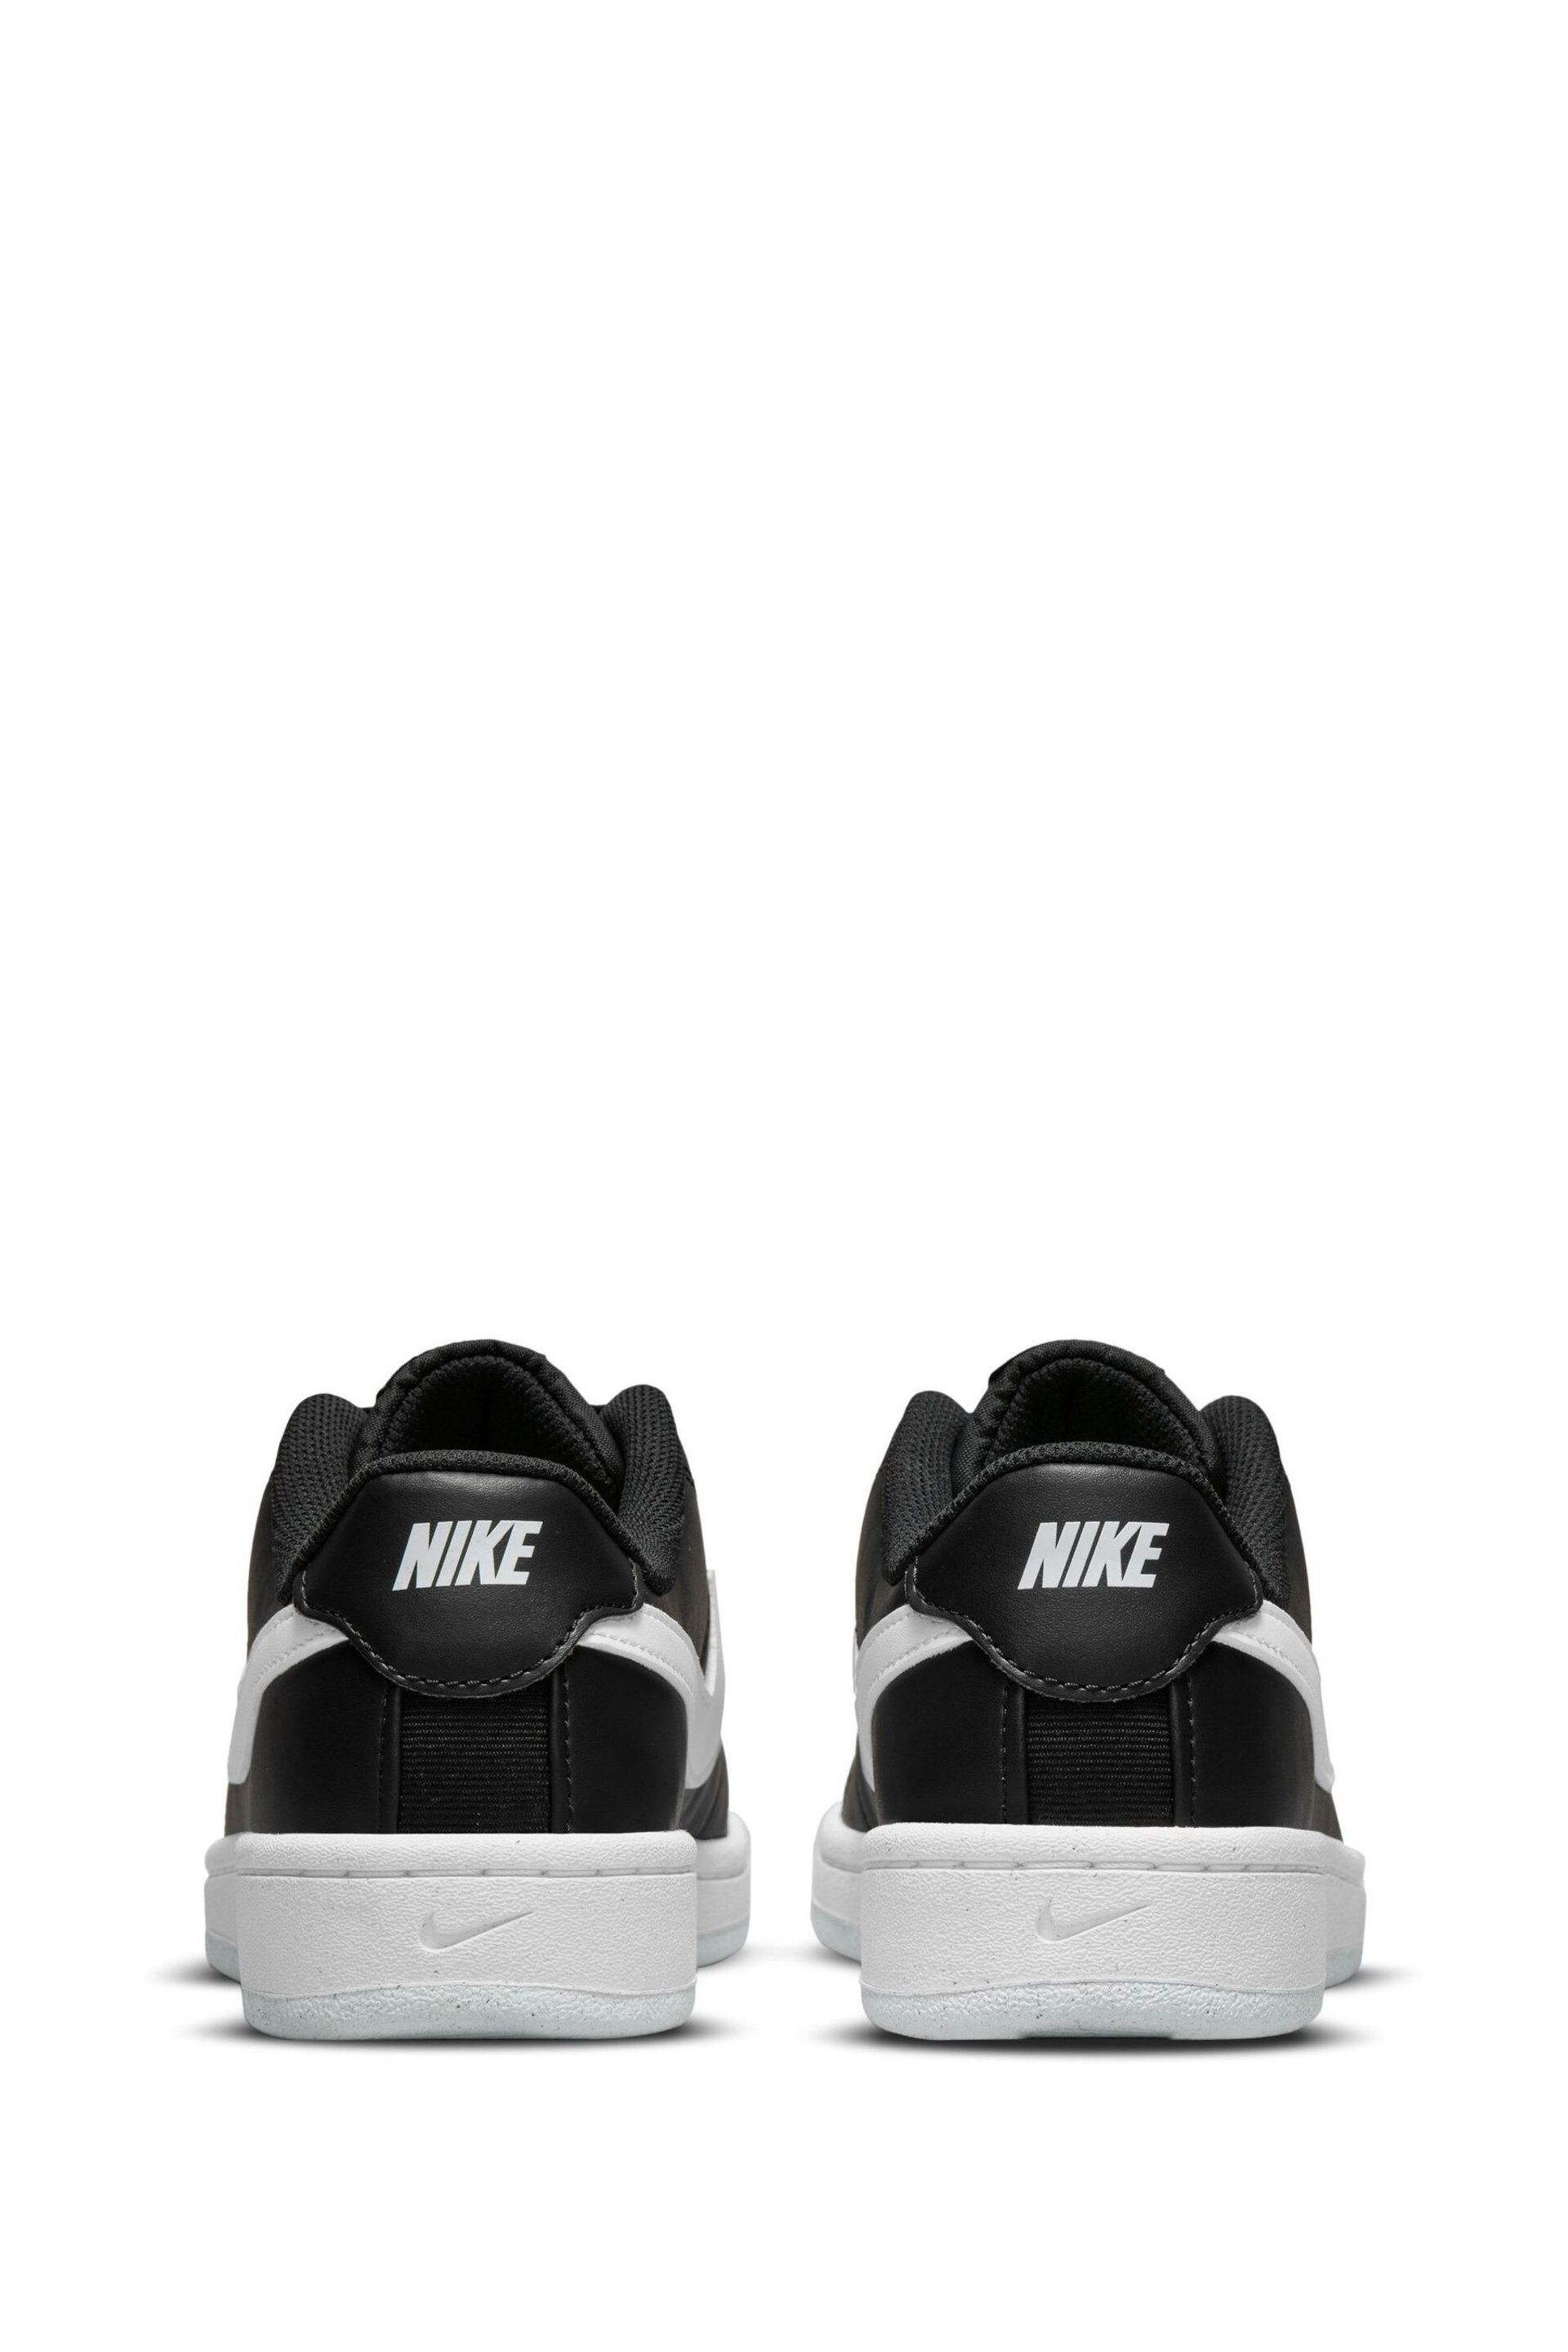 Nike Black Court Royale Trainers - Image 4 of 8